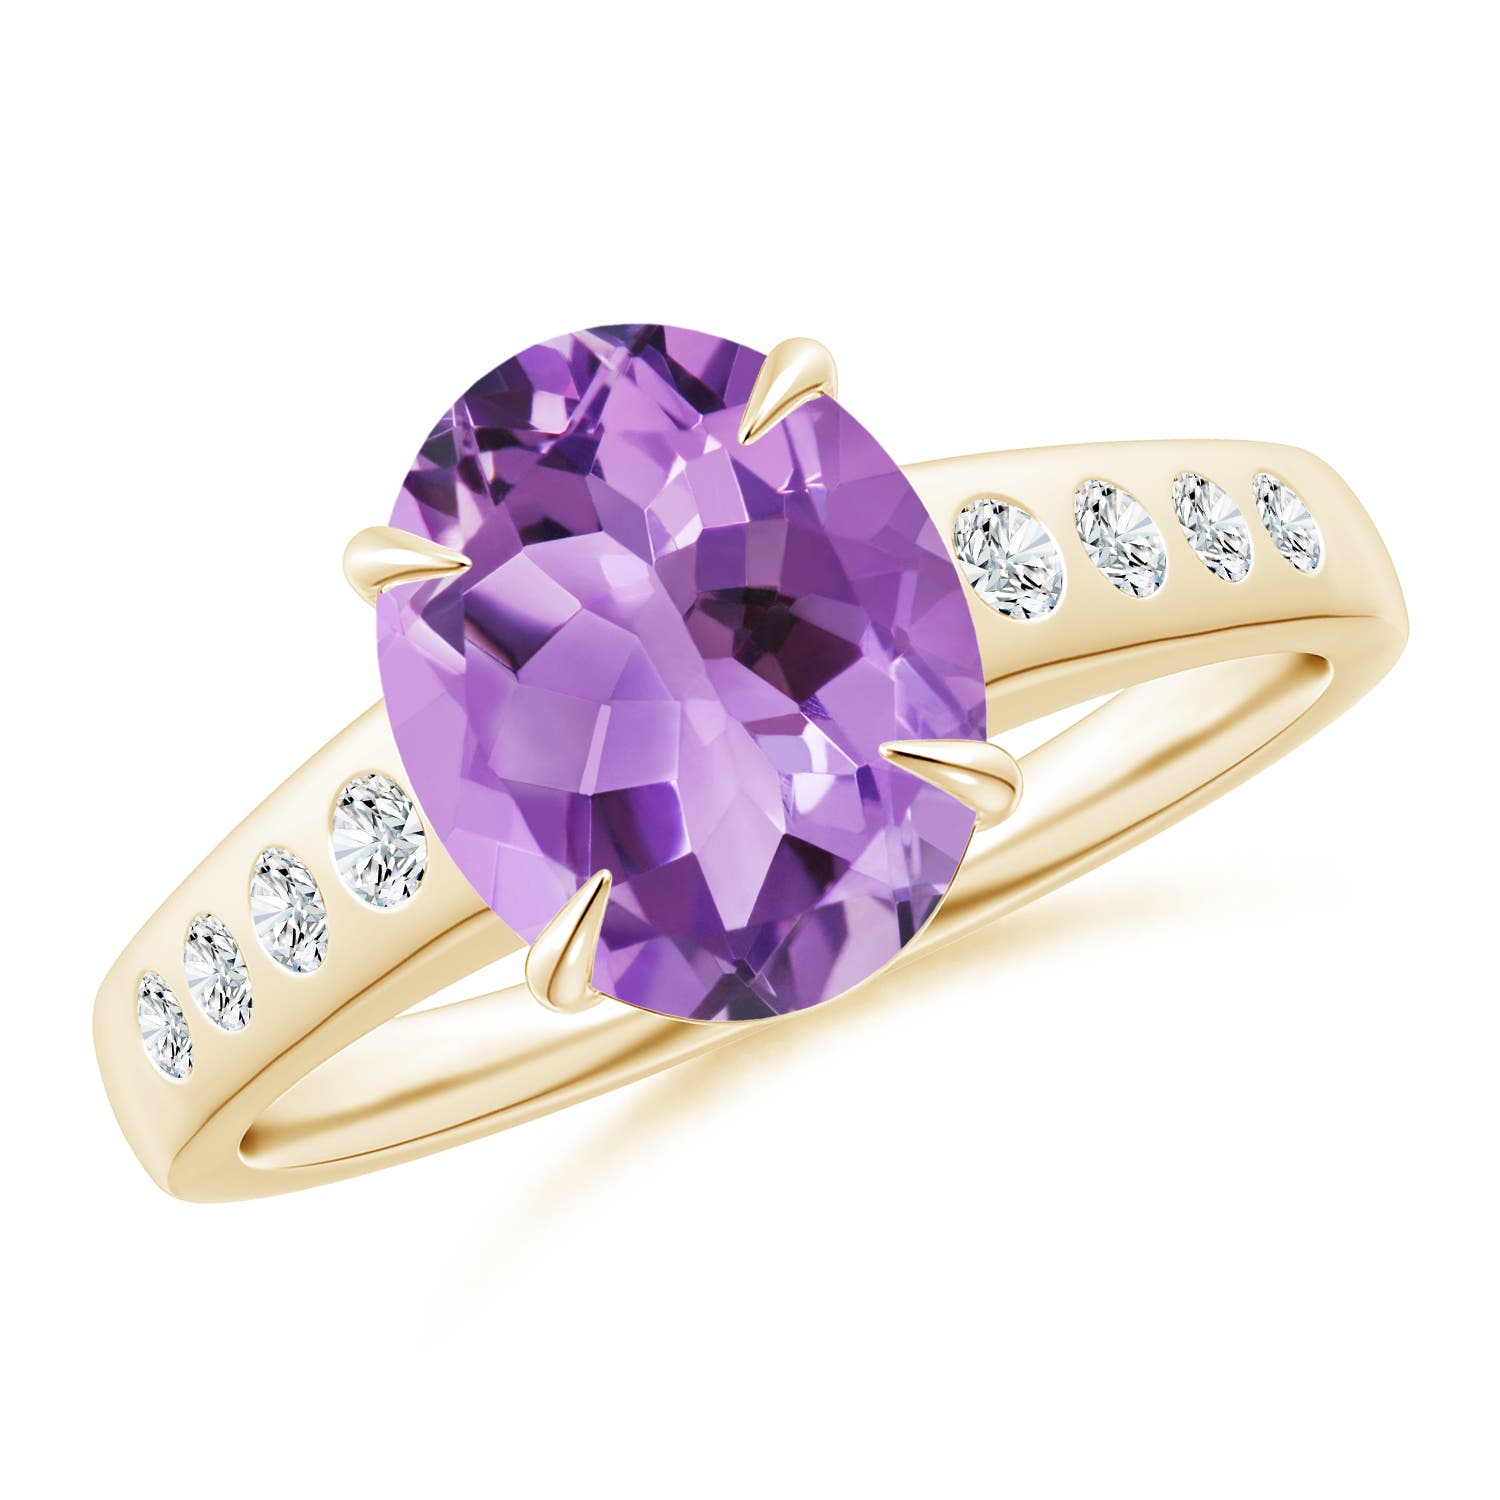 A - Amethyst / 2.5 CT / 14 KT Yellow Gold